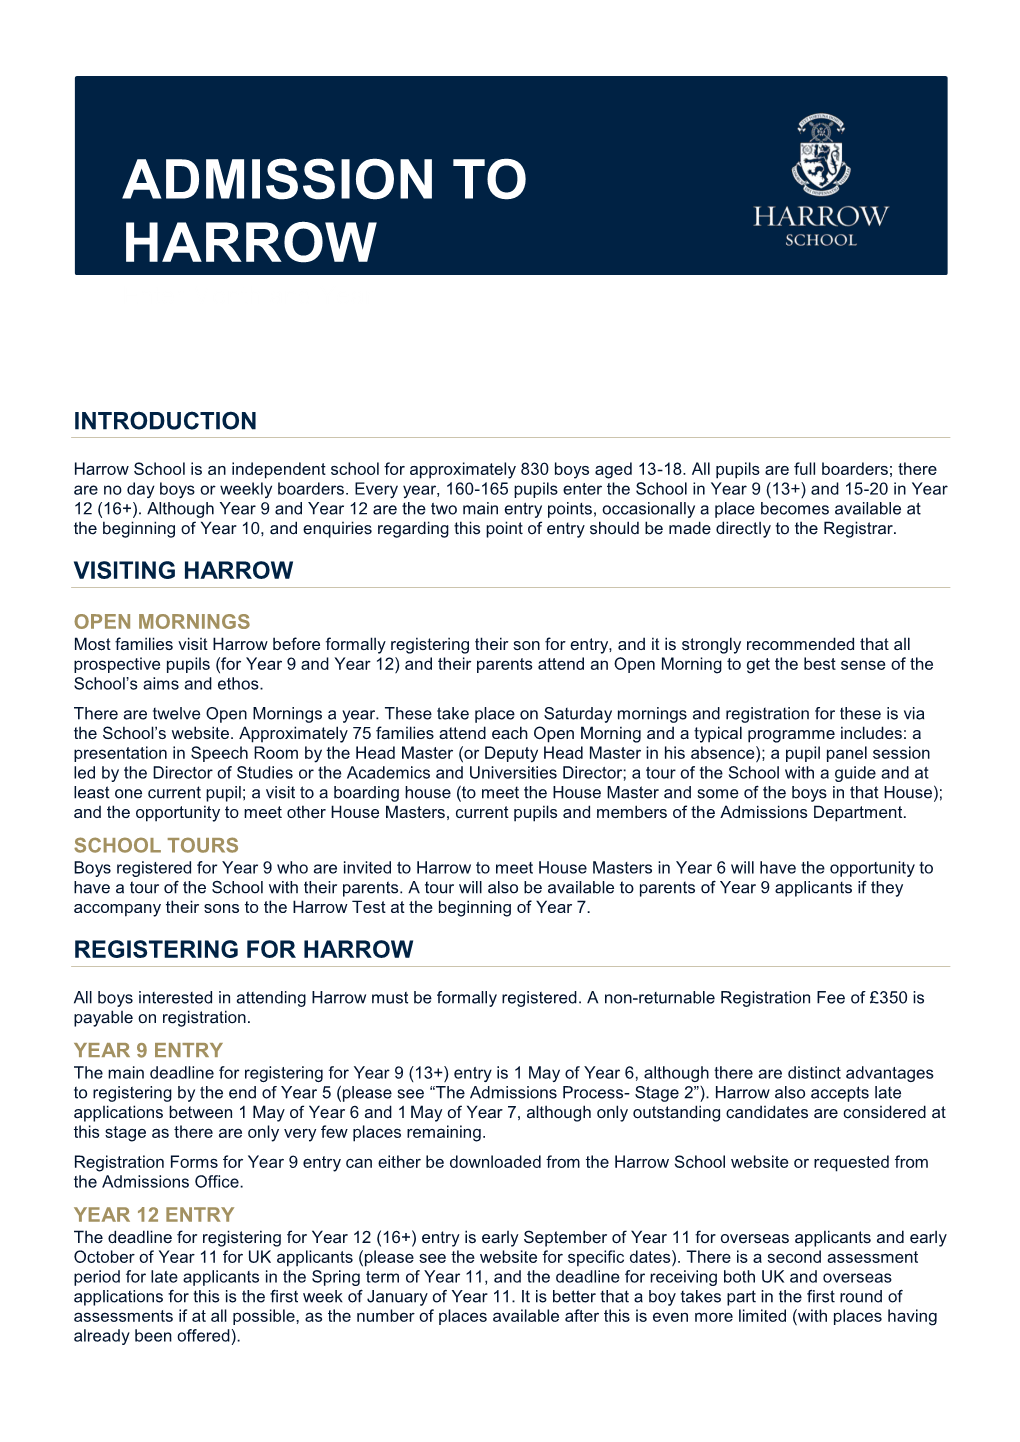 Admission to Harrow School Is in Accordance with the School’S Admission Policy